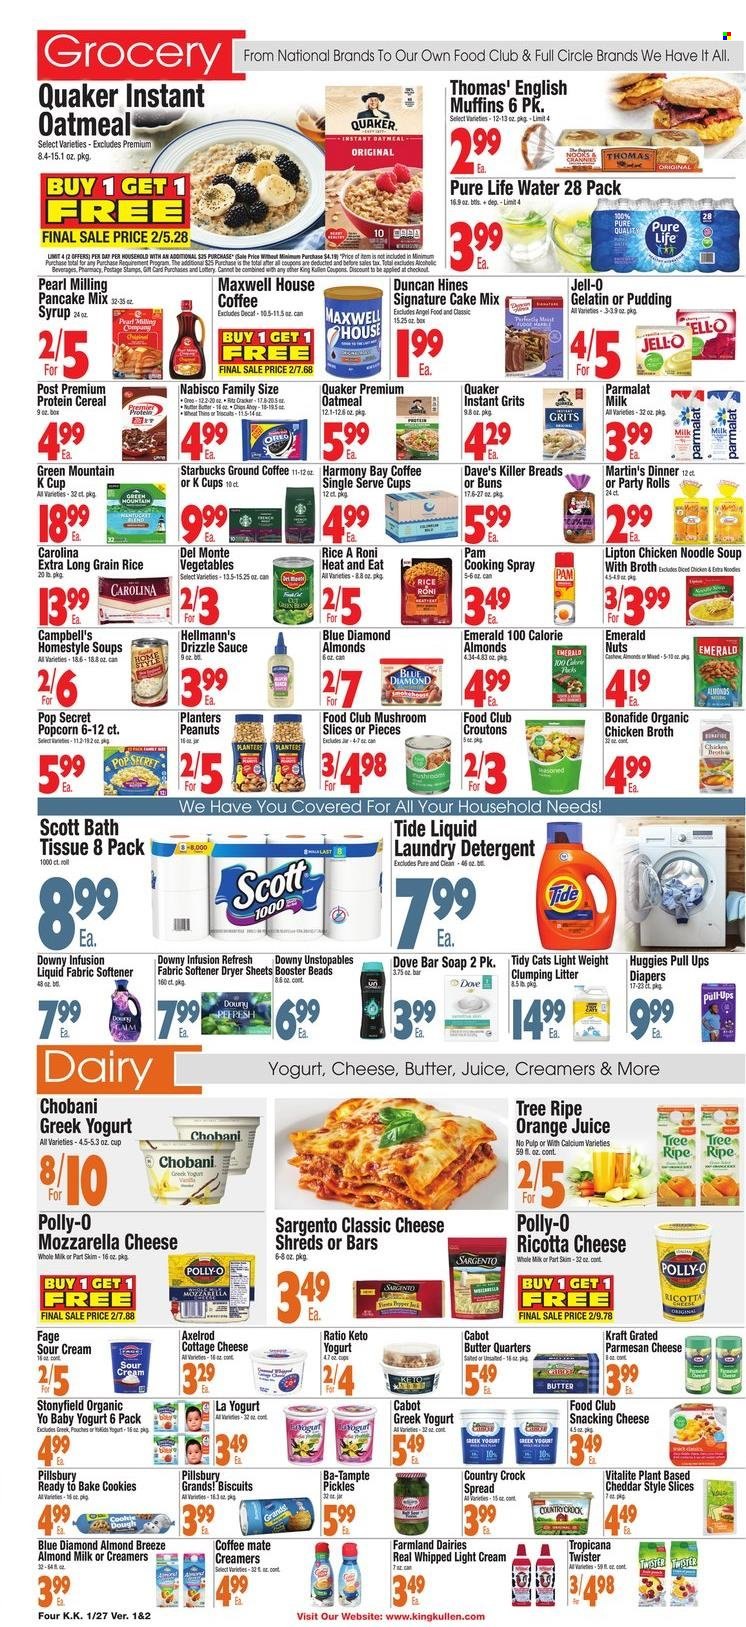 thumbnail - King Kullen Flyer - 01/27/2023 - 02/02/2023 - Sales products - mushrooms, english muffins, buns, Angel Food, cake mix, Campbell's, soup, sauce, pancakes, Pillsbury, noodles cup, Quaker, noodles, Annie's, Kraft®, cottage cheese, mozzarella, ricotta, cheddar, parmesan, cheese, Sargento, greek yoghurt, pudding, Oreo, yoghurt, Parmalat, Chobani, almond milk, Coffee-Mate, milk, Almond Breeze, sour cream, Hellmann’s, cookies, Dove, biscuit, RITZ, Thins, popcorn, croutons, chicken broth, oatmeal, grits, Jell-O, broth, pickles, Del Monte, cereals, rice, long grain rice, cooking spray, syrup, peanuts, Planters, Blue Diamond, orange juice, juice, Lipton, Tropicana Twister, Pure Life Water, Maxwell House, Starbucks, ground coffee, coffee capsules, K-Cups, Green Mountain, Huggies, nappies, bath tissue, Scott, detergent, Tide, Unstopables, fabric softener, laundry detergent, dryer sheets, soap bar, soap, cat litter, calcium, gelatin. Page 4.